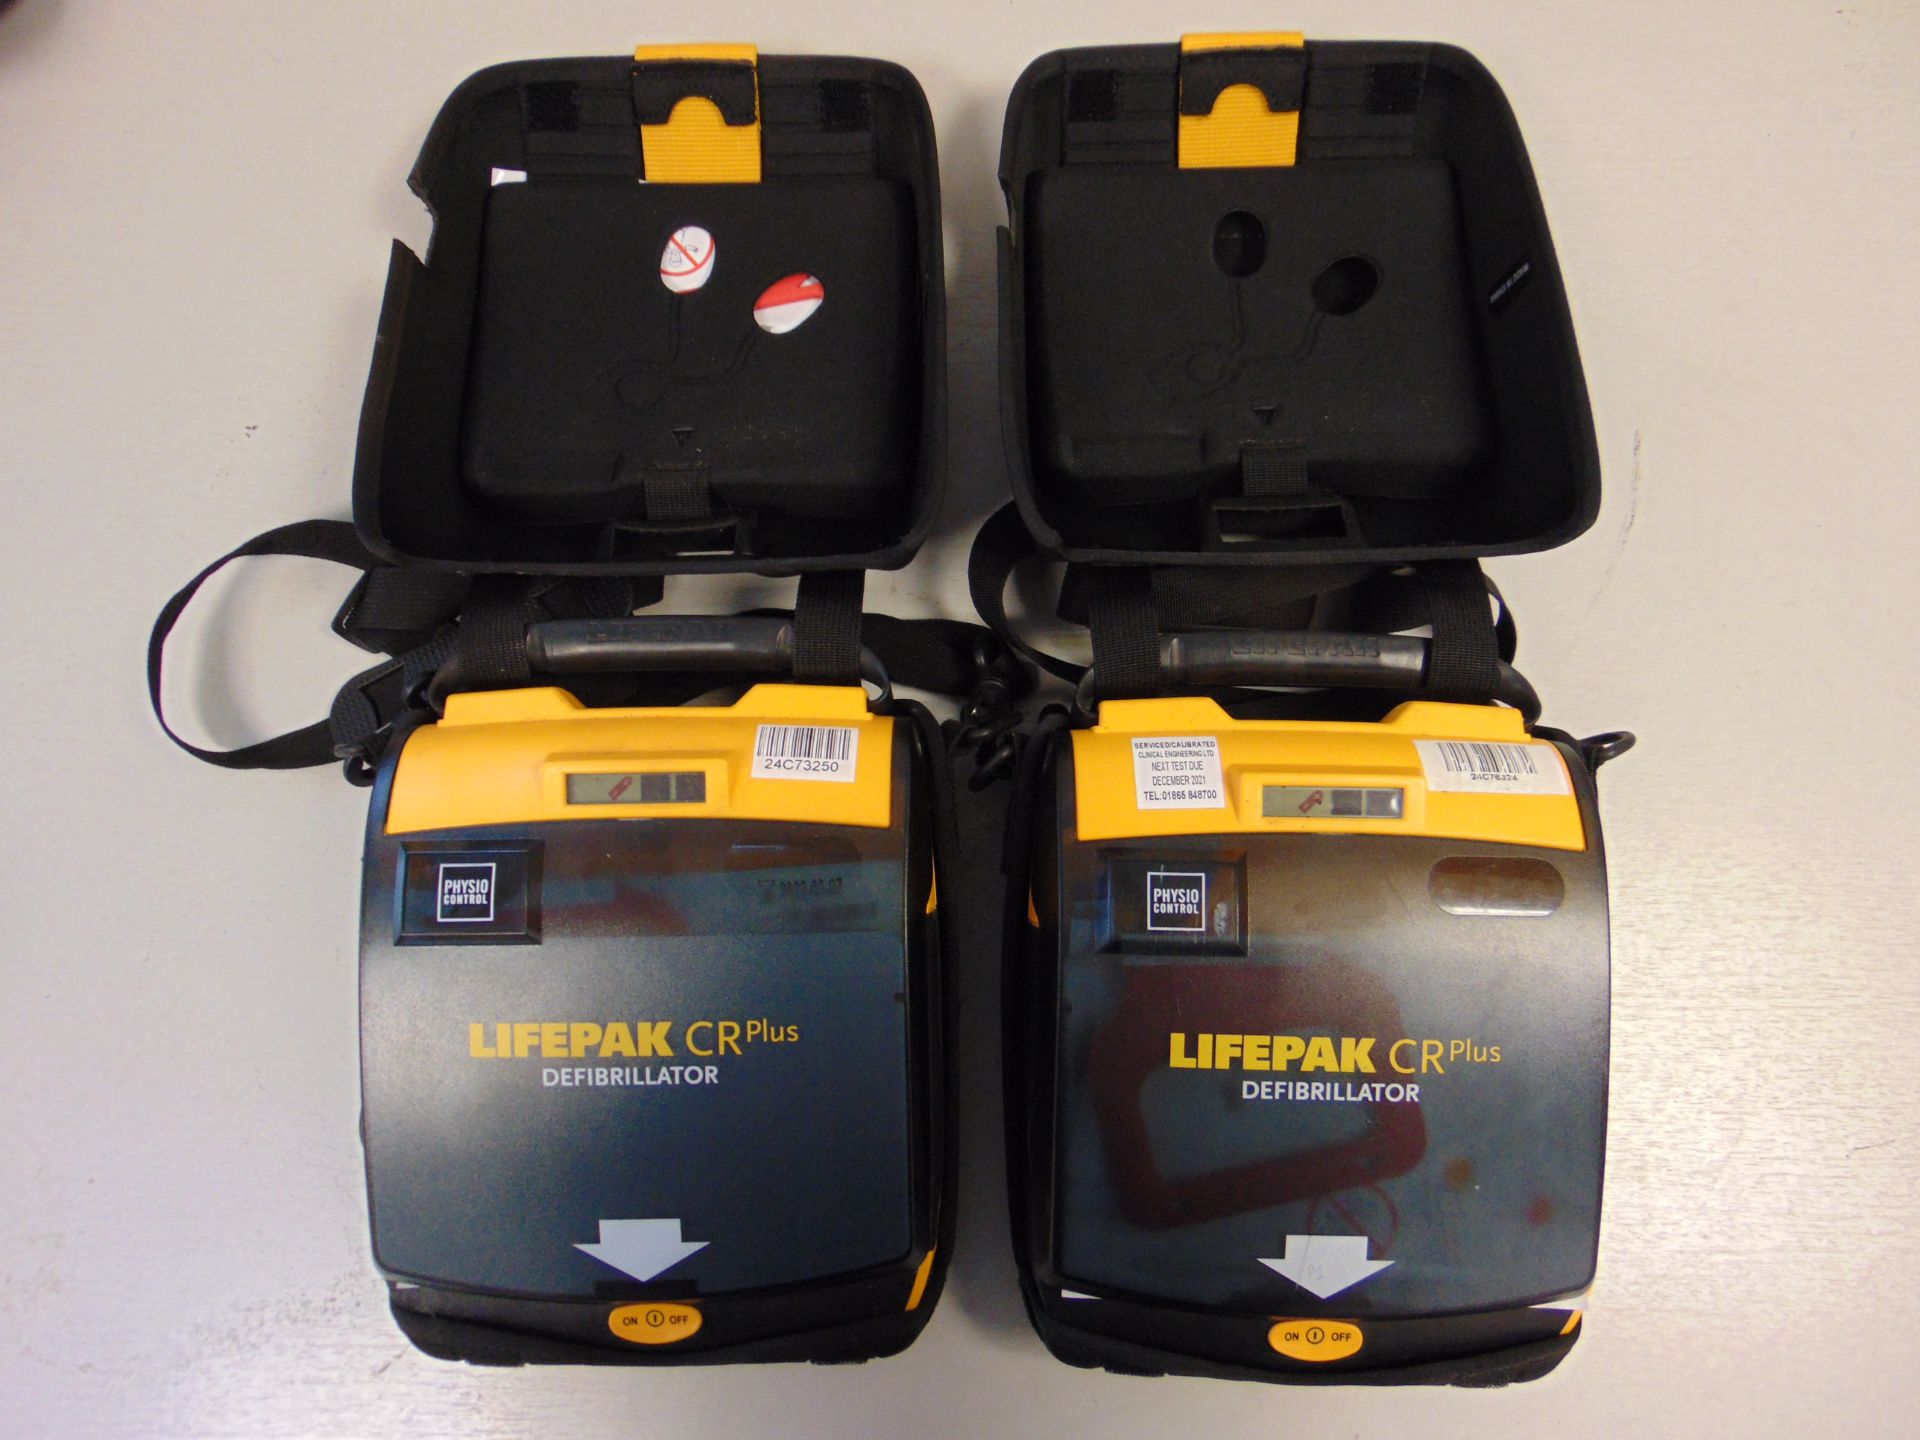 You are bidding on 2 x Physio-Control Lifepak CR Plus Defibrillator Units - Fully Automatic - Image 3 of 3